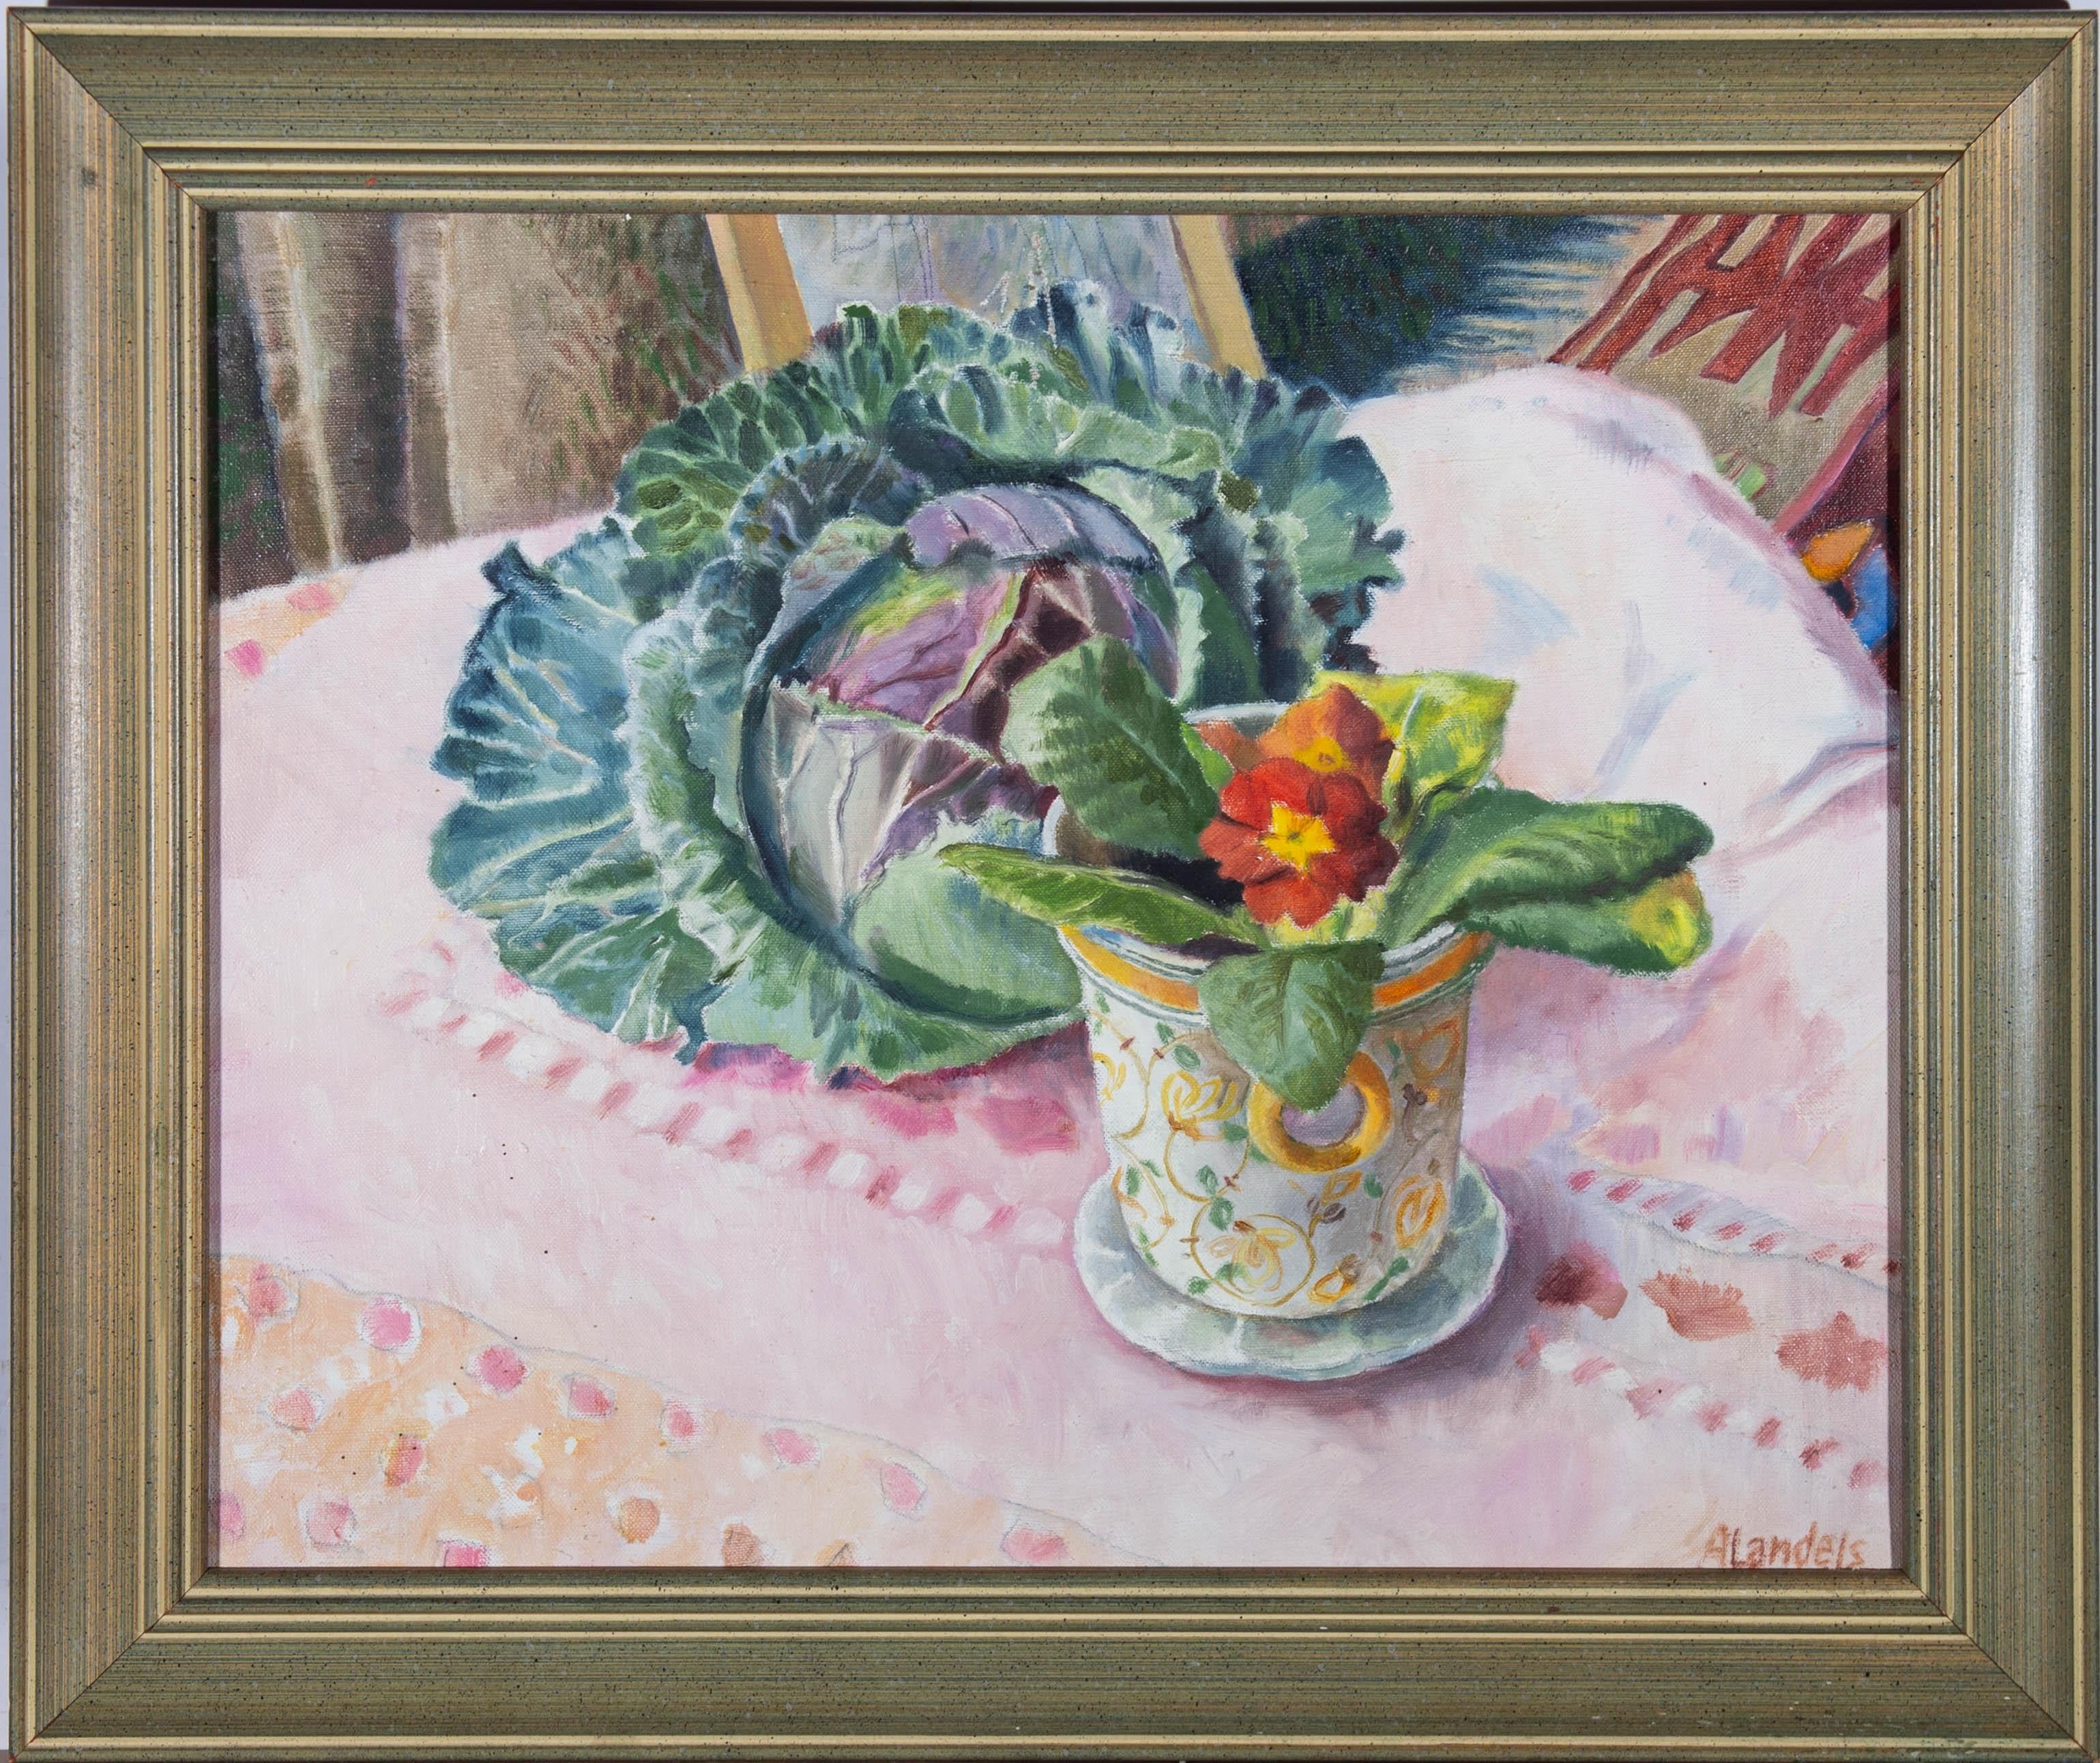 A vibrant still life oil, depicting a table with a cabbage and polyanthus flowers. Signed to the lower right-hand corner. There is a label on the reverse inscribed with the artist's name and title. Well-presented in a distressed, gilt-effect and